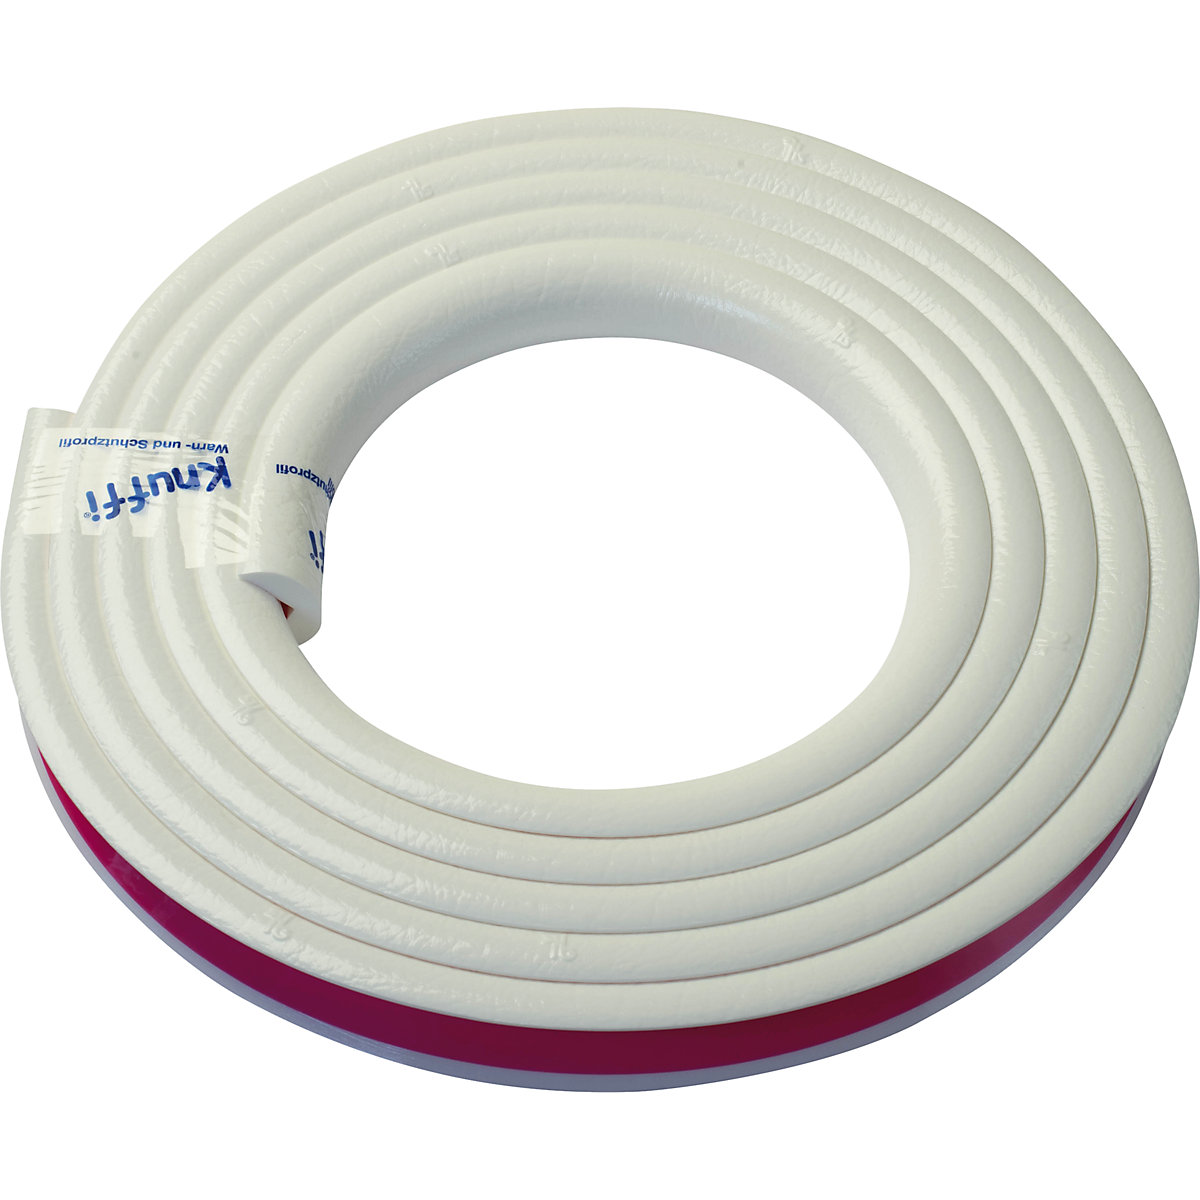 Knuffi® corner protection – SHG, type A, 1 x 5 m roll, white-22